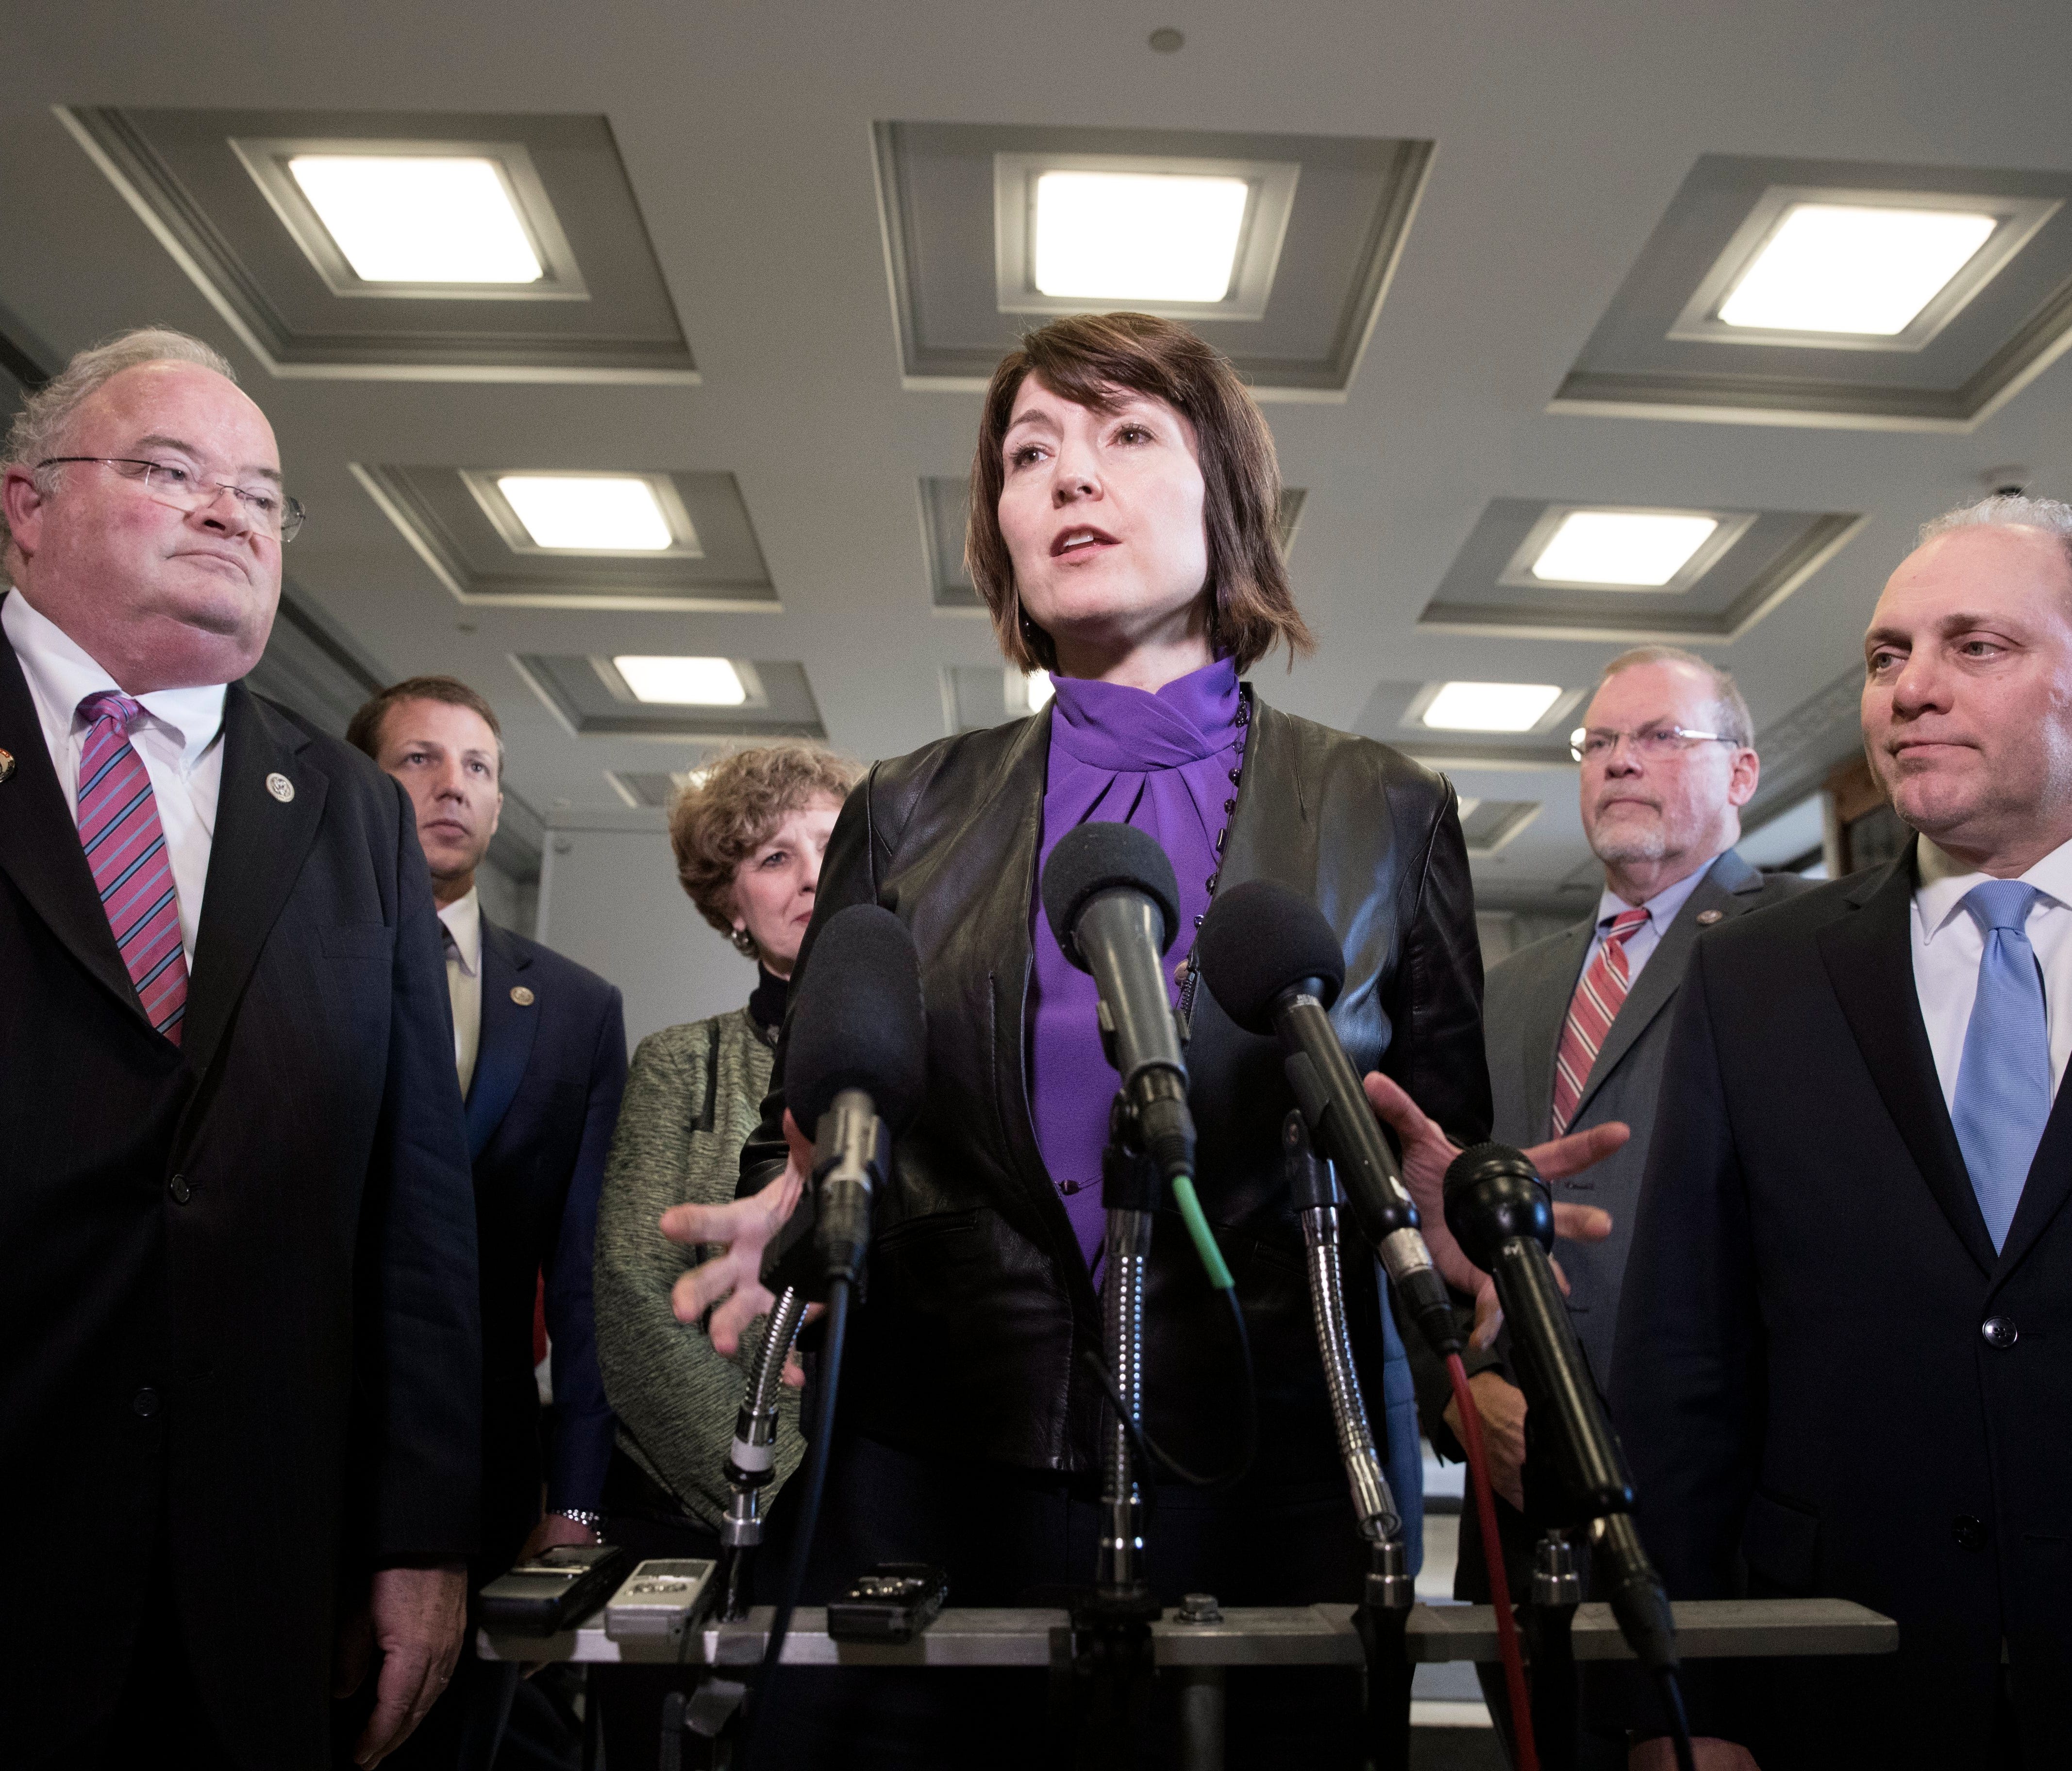 Rep. Billy Long, R-Mo., appears with two House GOP leaders, Washington Rep. Cathy McMorris Rodgers and Louisiana Rep. Steve Scalise, at a news conference after the House Energy and Commerce Committee voted to advance the American Health Care Act on M